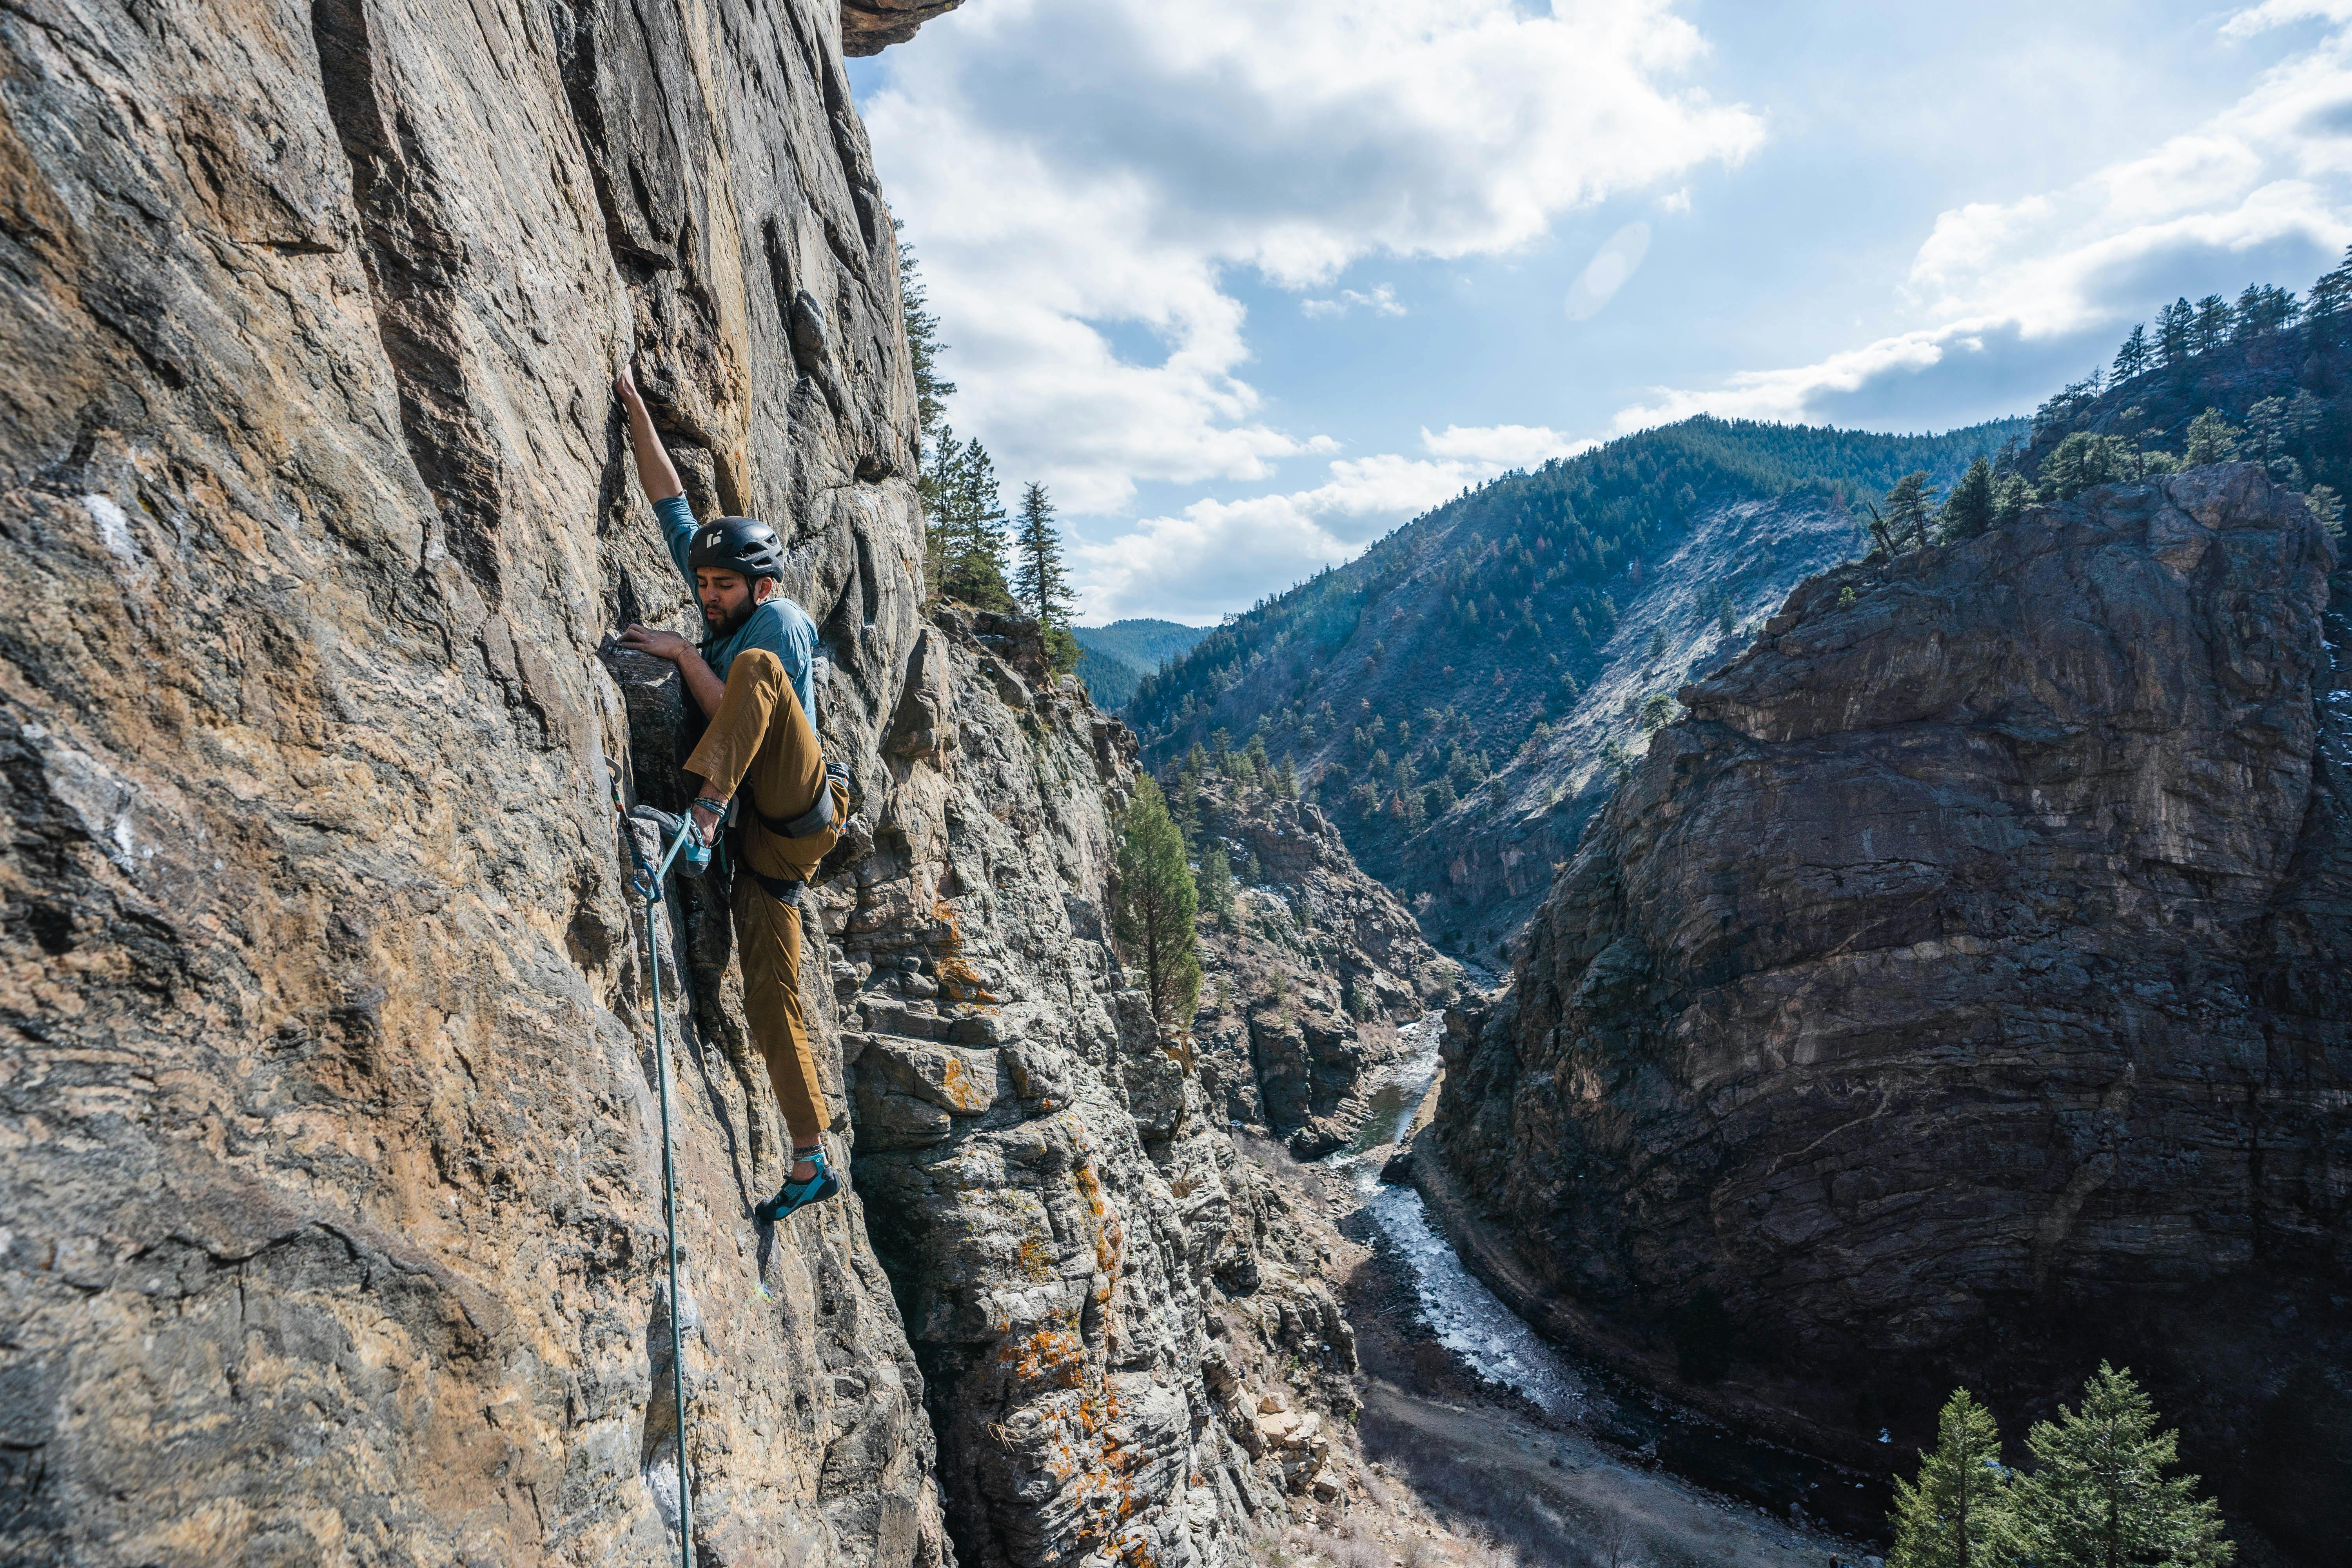 Black Diamond ambassador Xavier Bravo rock climbing in the Rocklock Climbing pants with a scenic canyon in the background. 